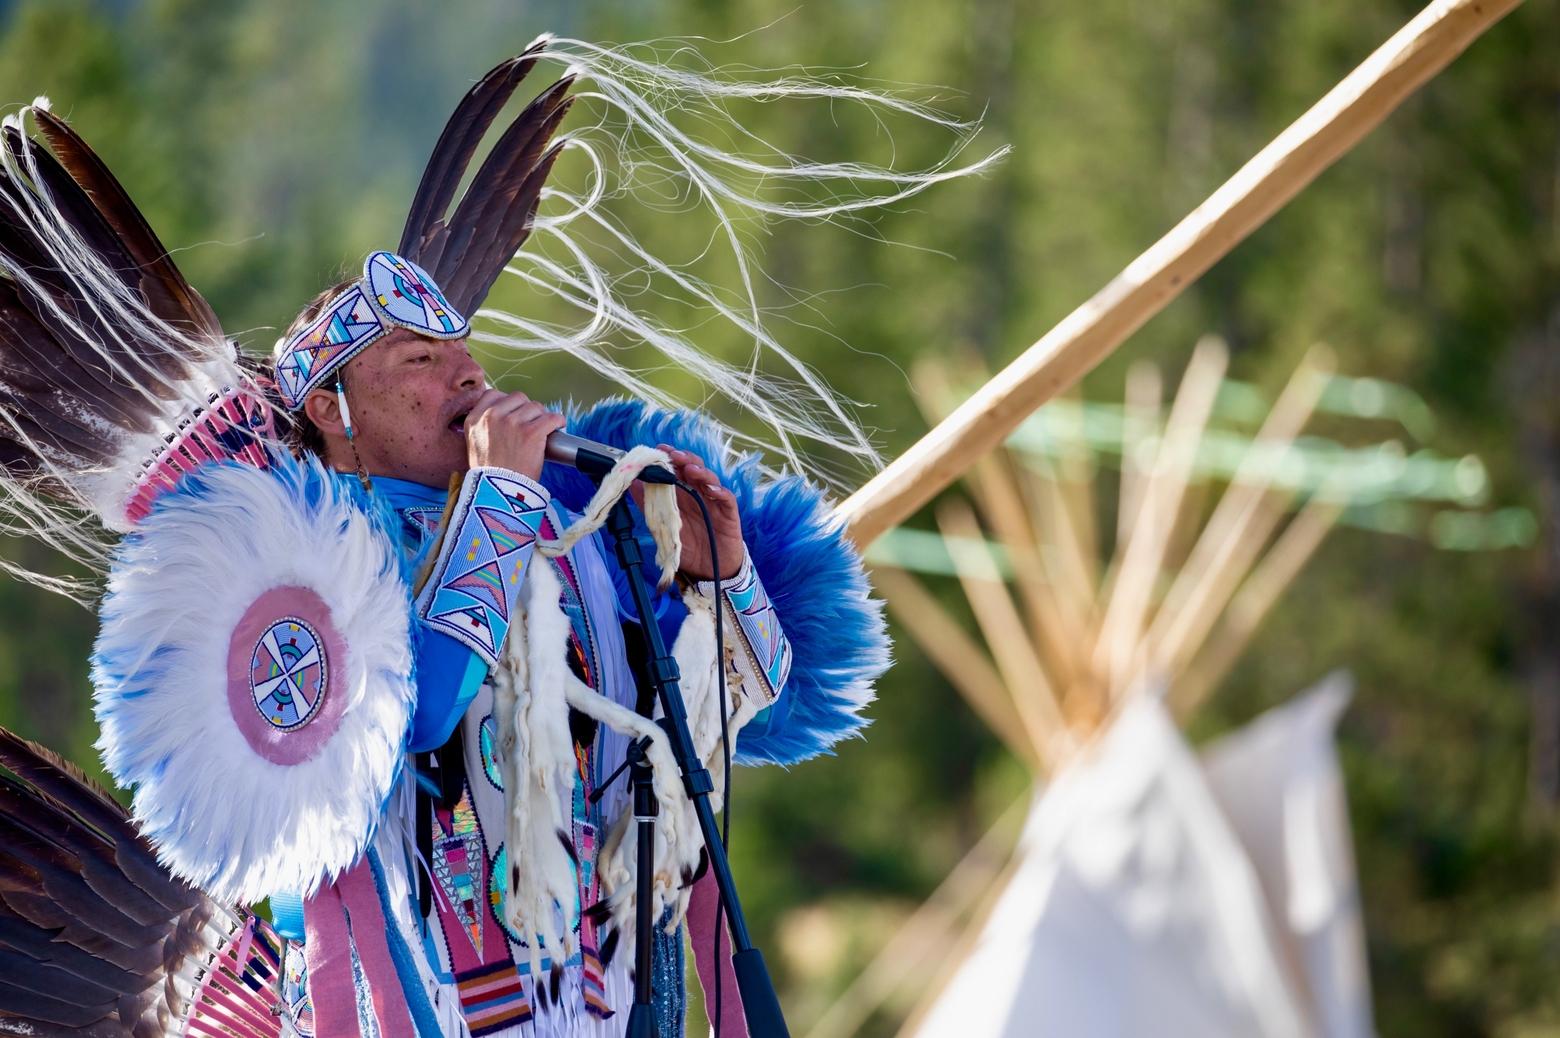 Last year, Crow musical performer Supaman, who has fans around the world, made a special appearance at the Madison Junction teepee encampment. This year, artists Sean Chandler and Ben Pease are among the guest artists, spiritual and cultural leaders. Photo courtesy Ashton Hooker